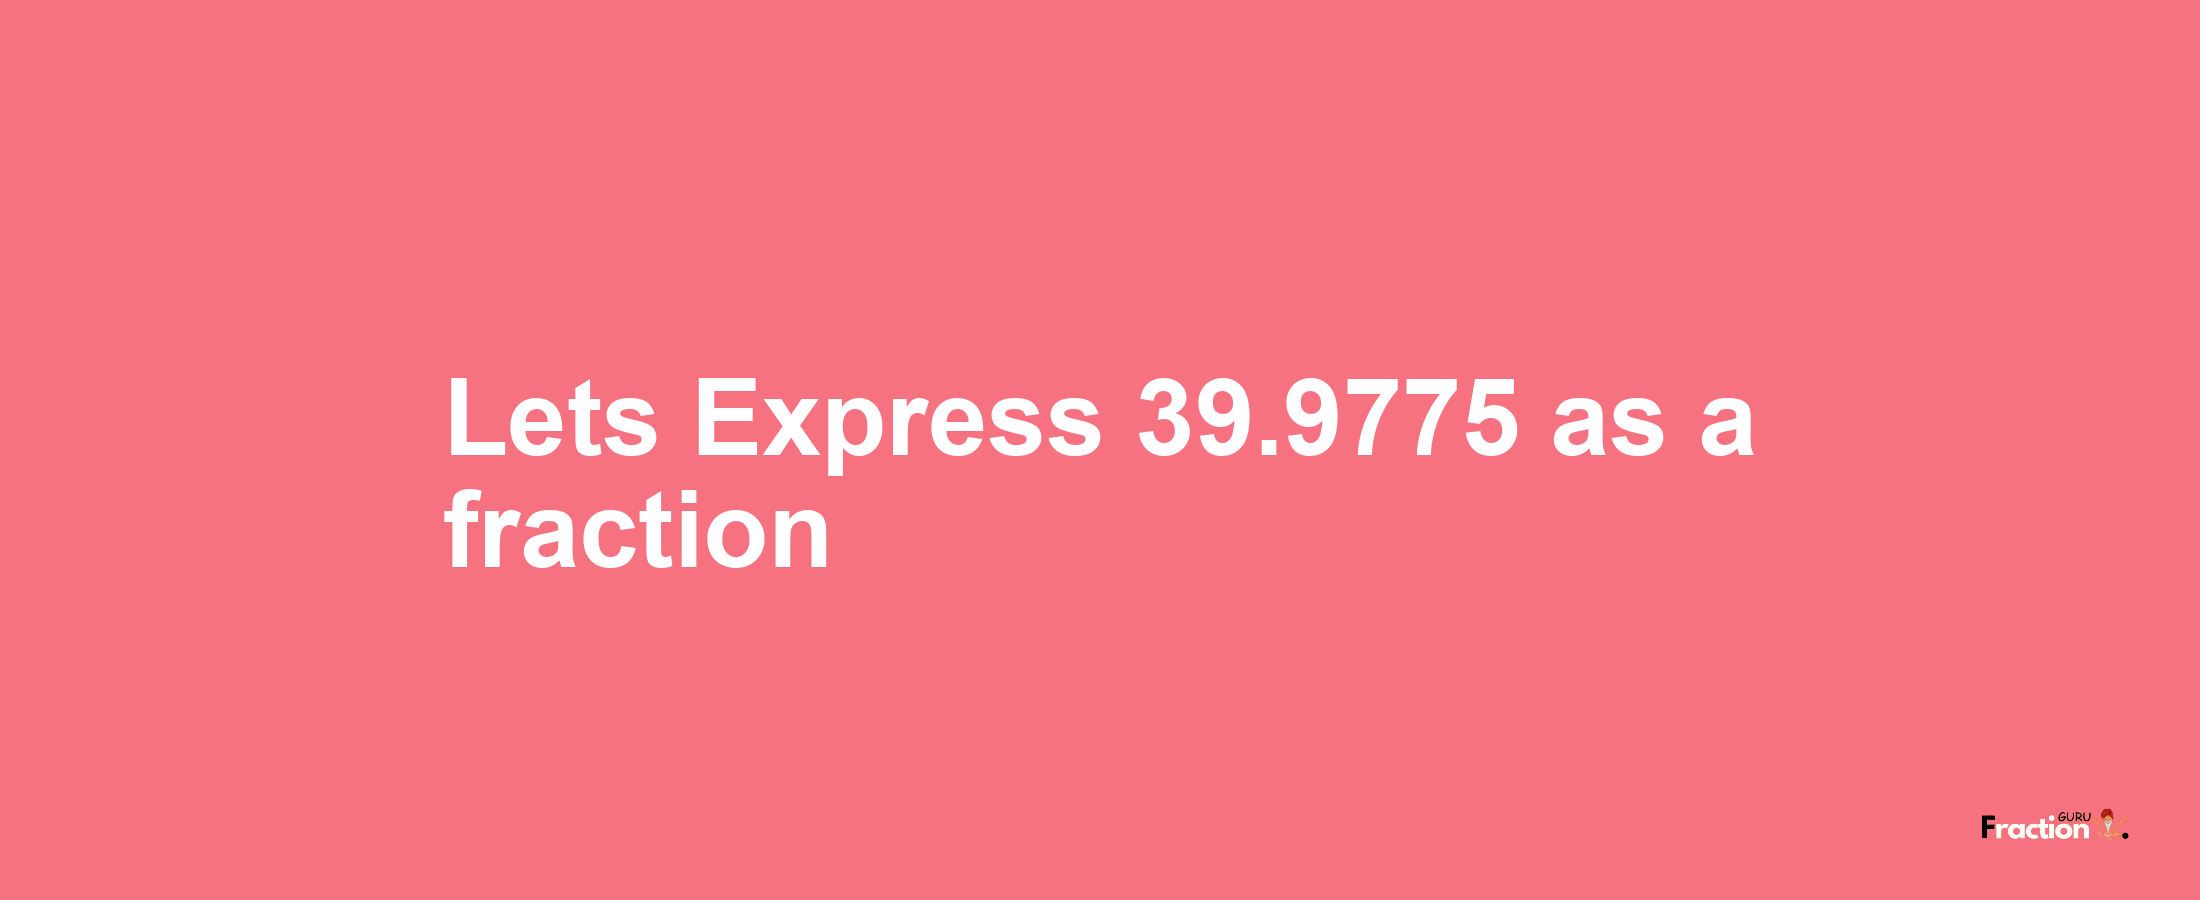 Lets Express 39.9775 as afraction